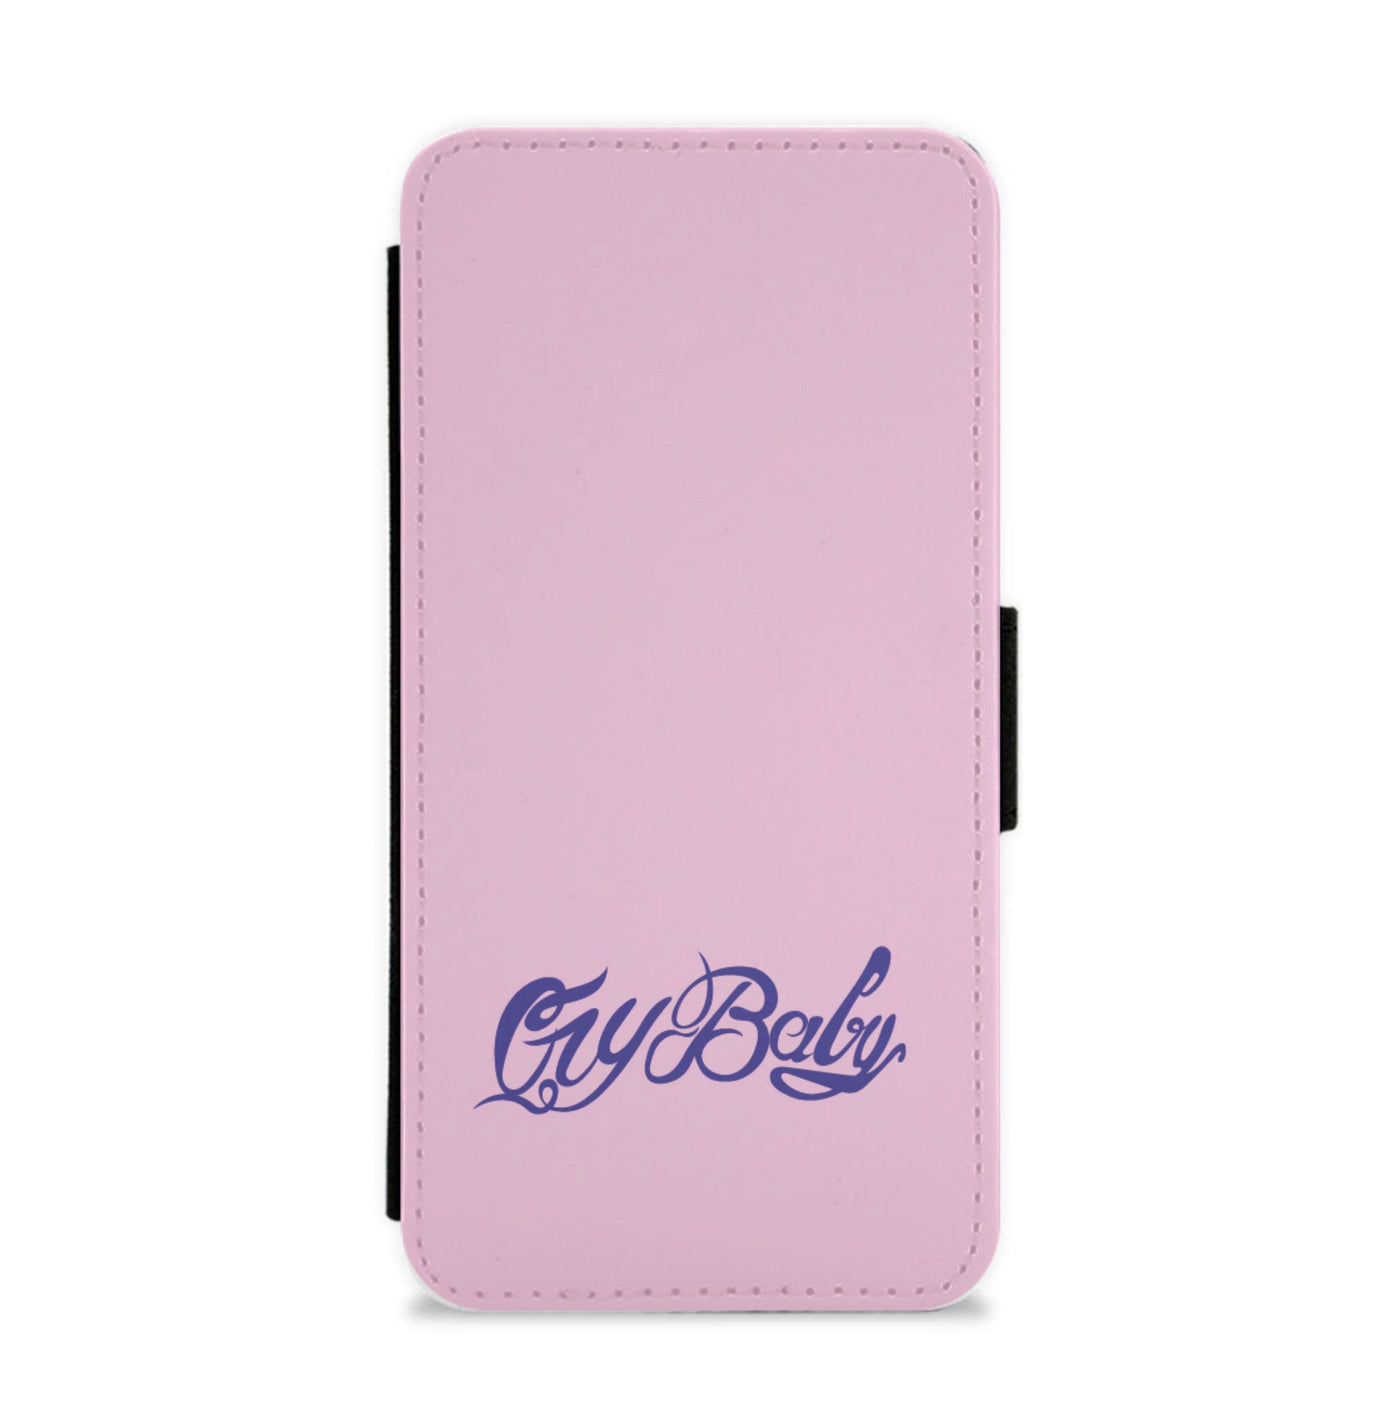 Cry Baby - Lil Peep Flip / Wallet Phone Case